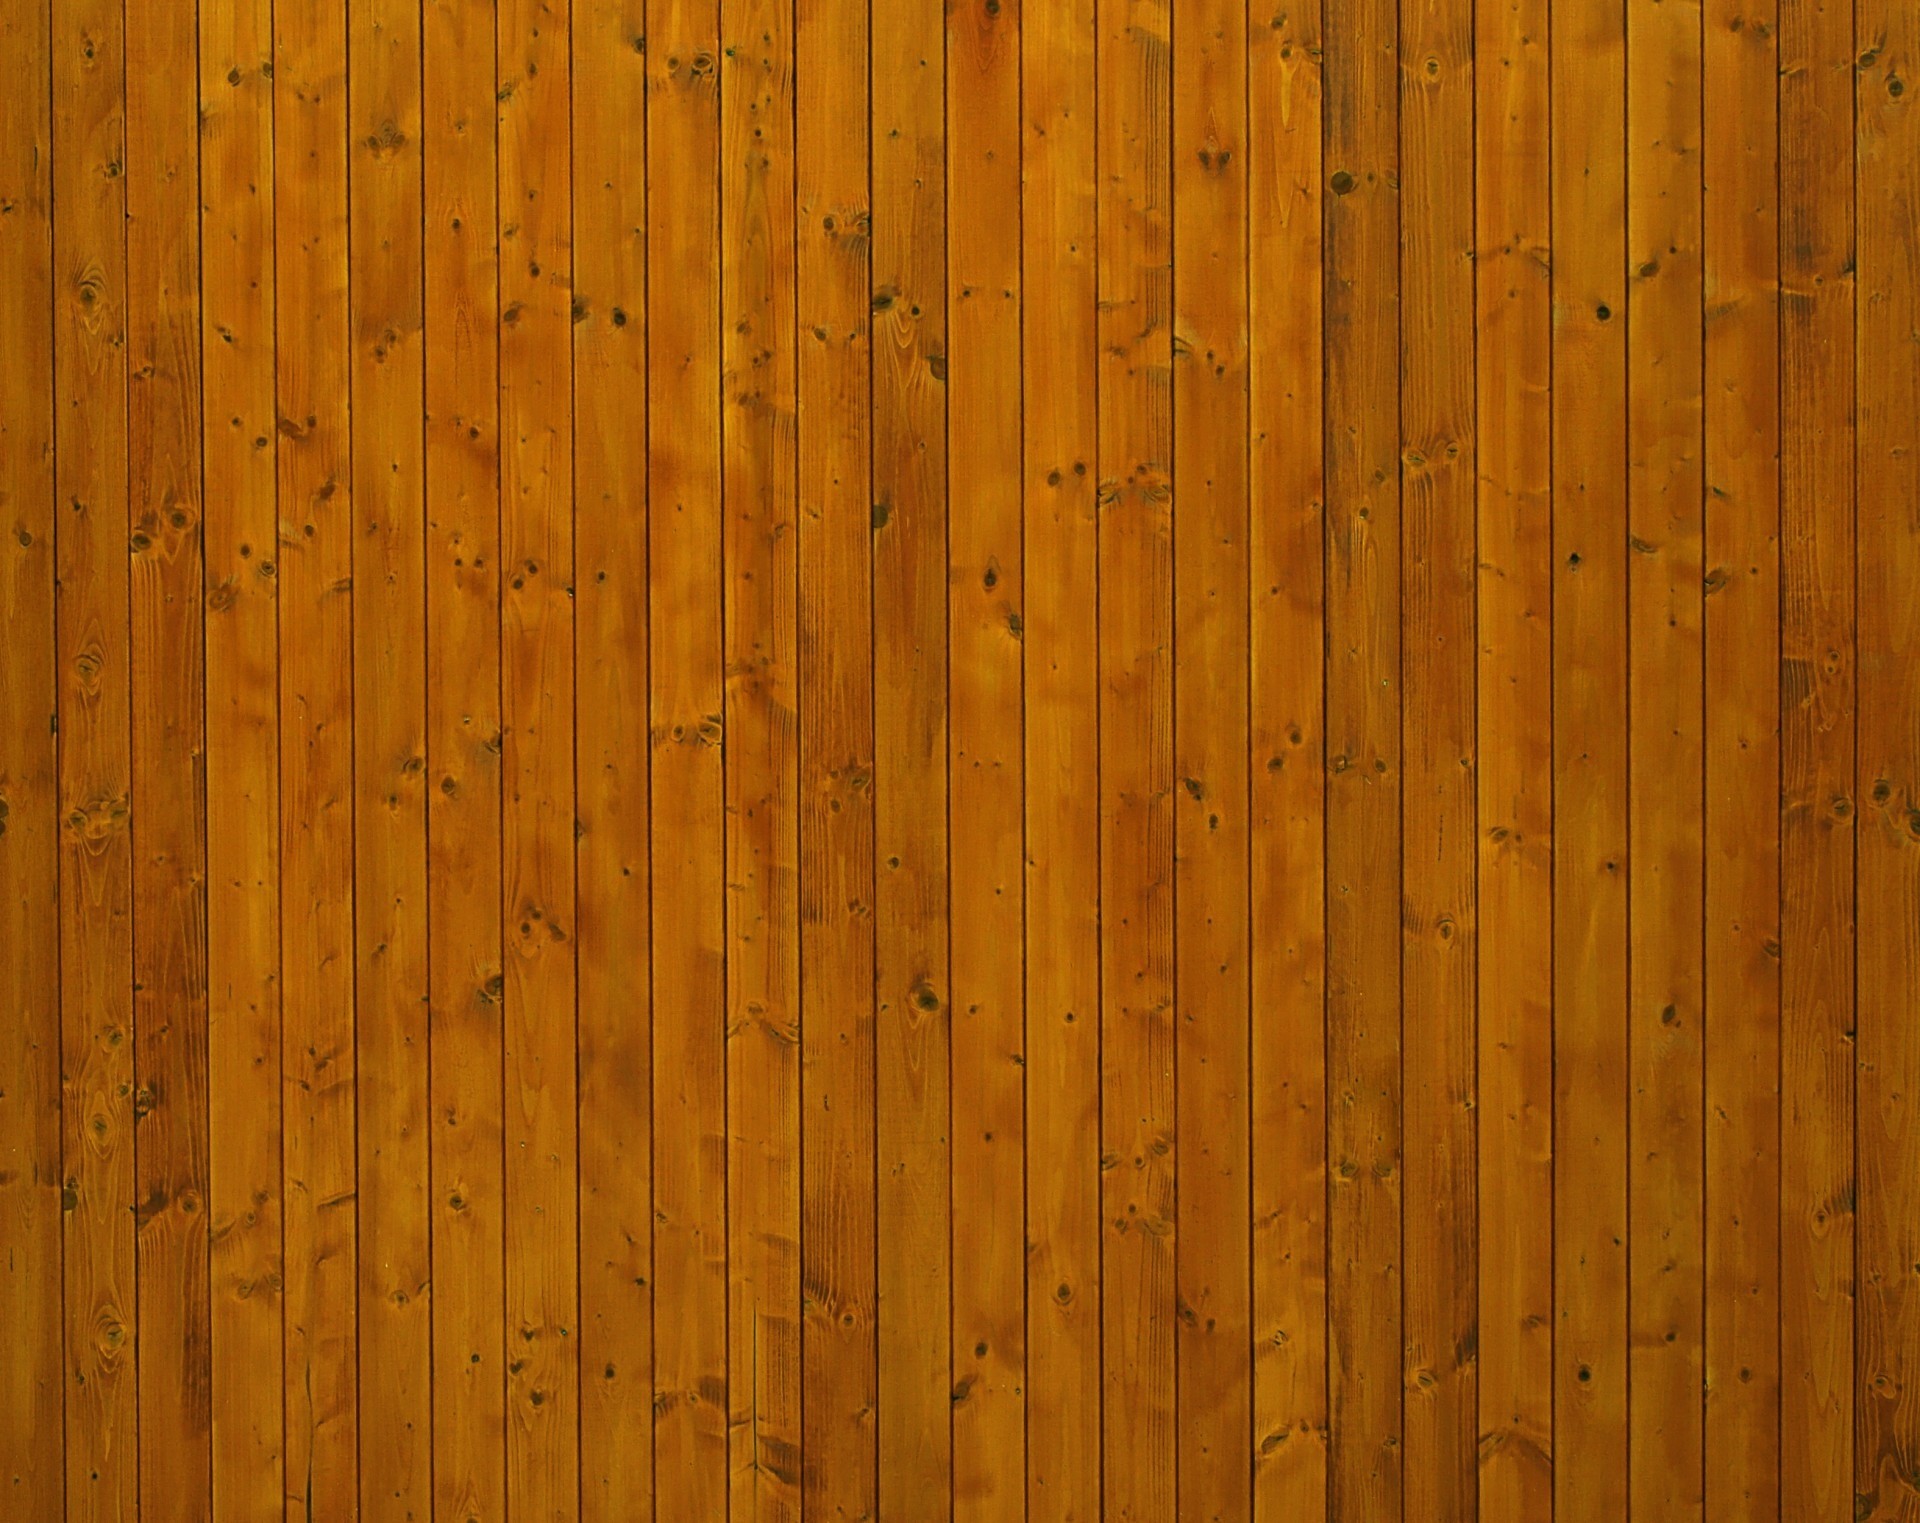 1920x1523 Free Images : fence, deck, board, ground, texture, plank, wall, pattern,  brown, lumber, door, surface, background, hardwood, wooden, wallpaper,  backboard, ...